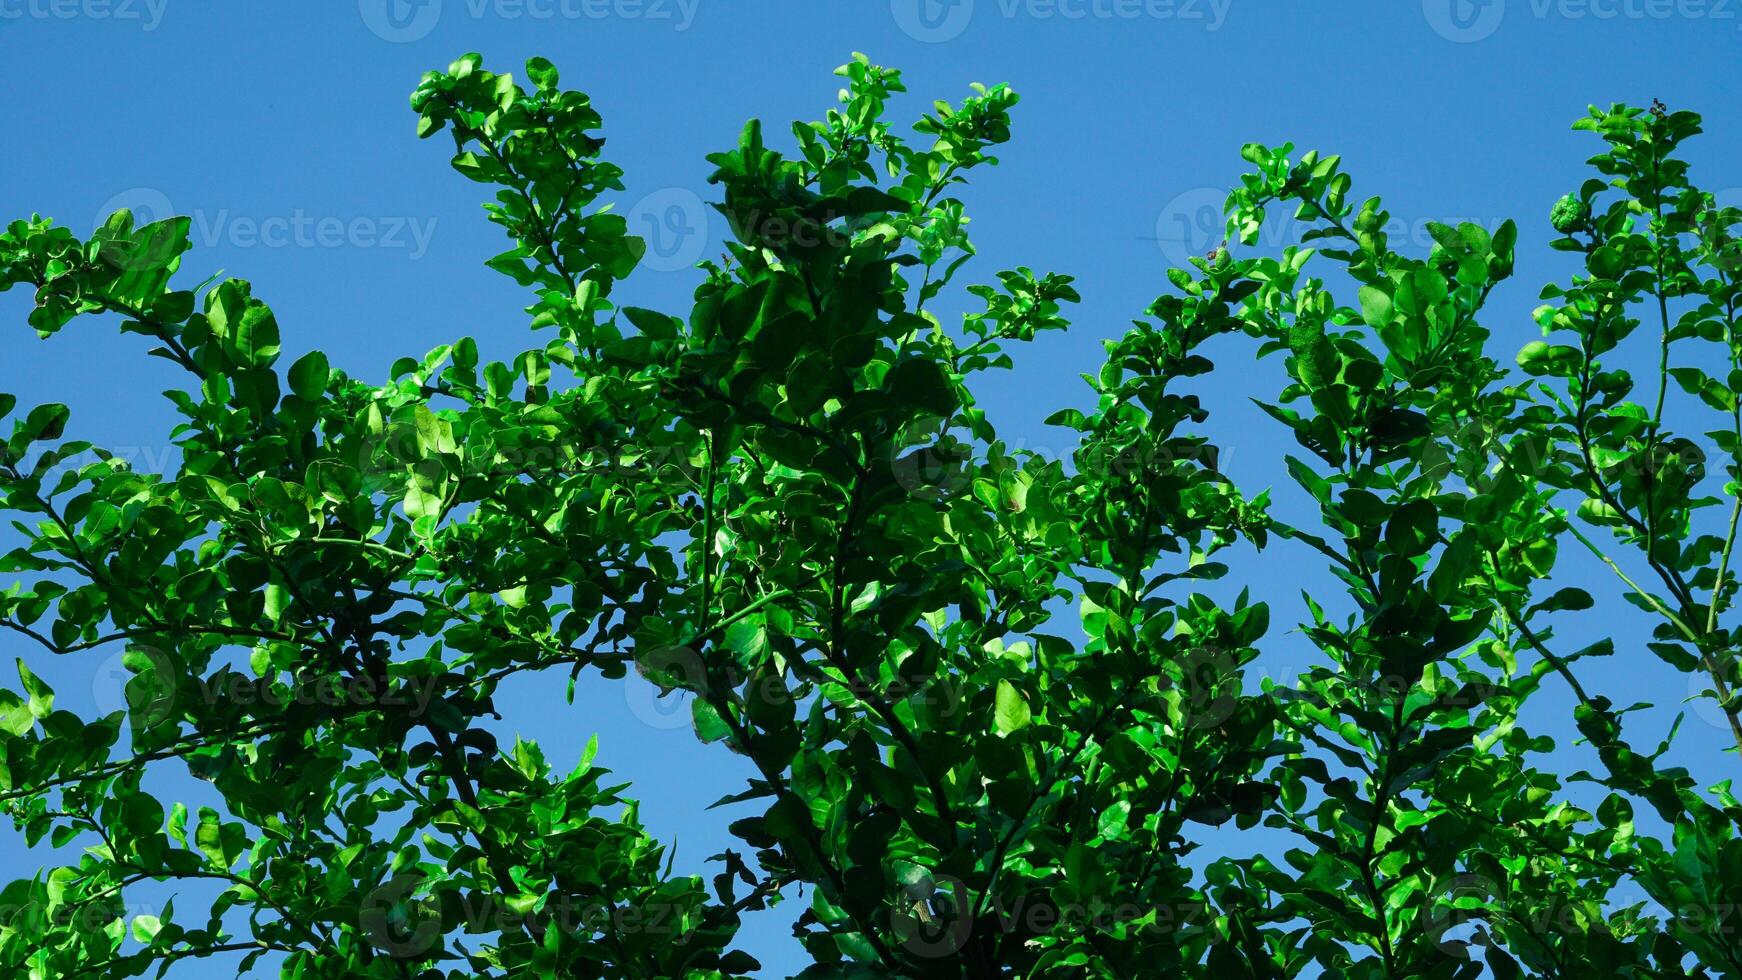 Kaffir lime trees and their thick, lush leaves against the clear sky in summer photo